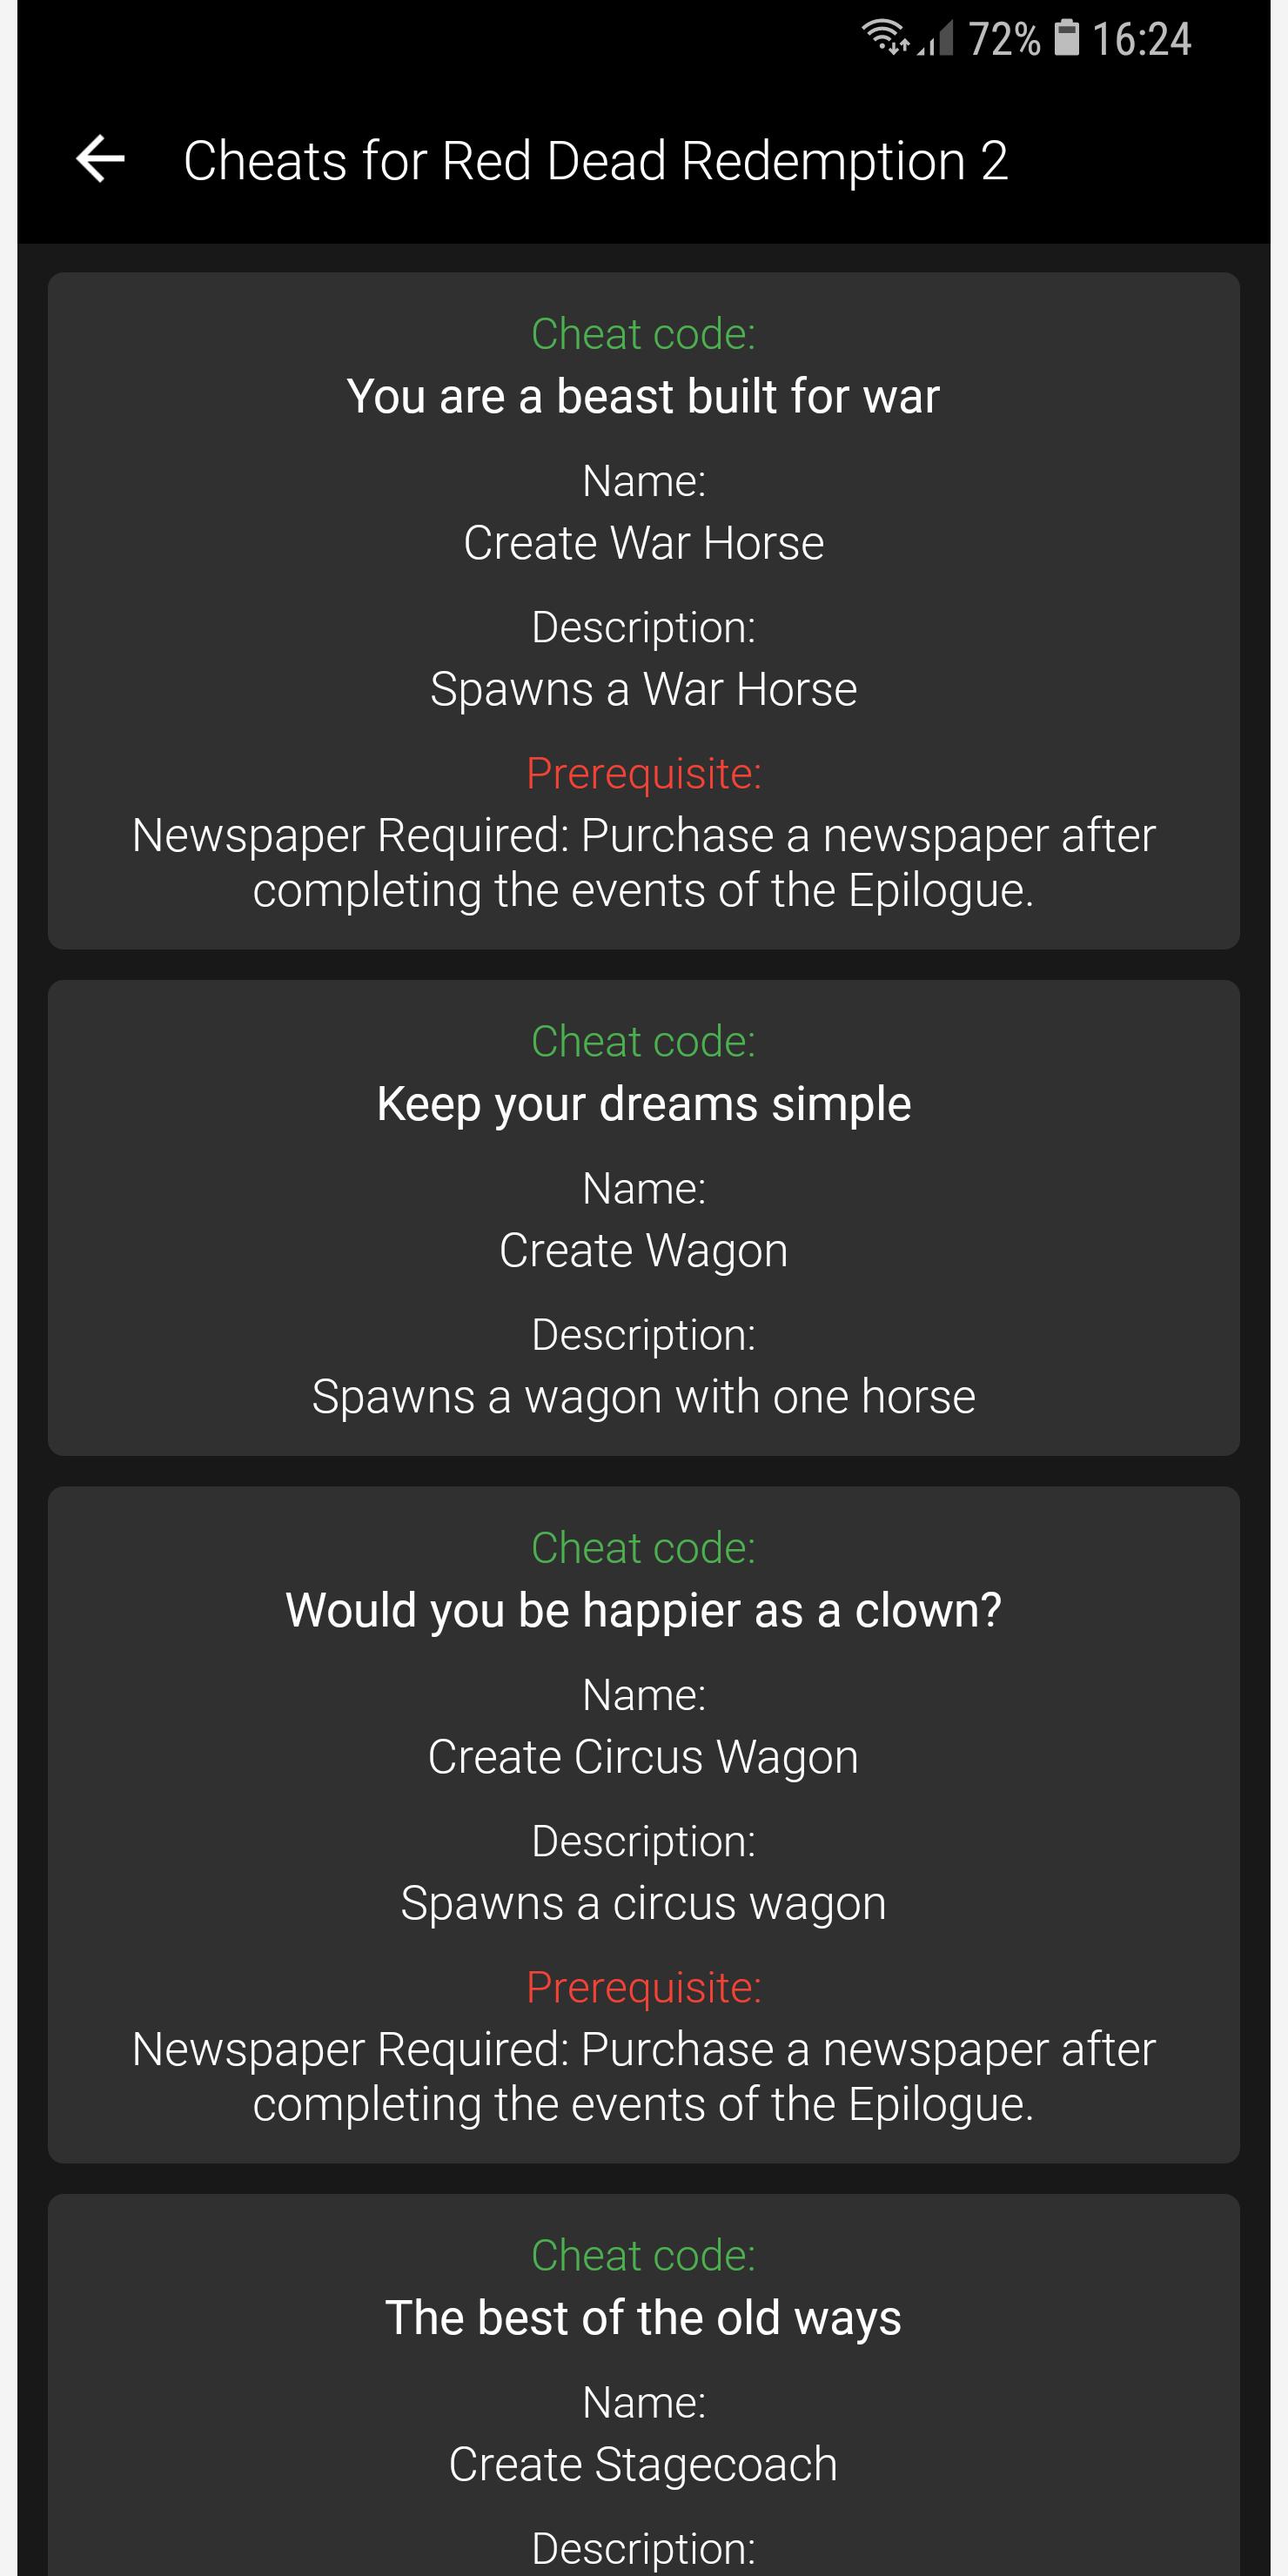 Cheats for Red Dead Redemption 1 & 2 for Android - APK Download